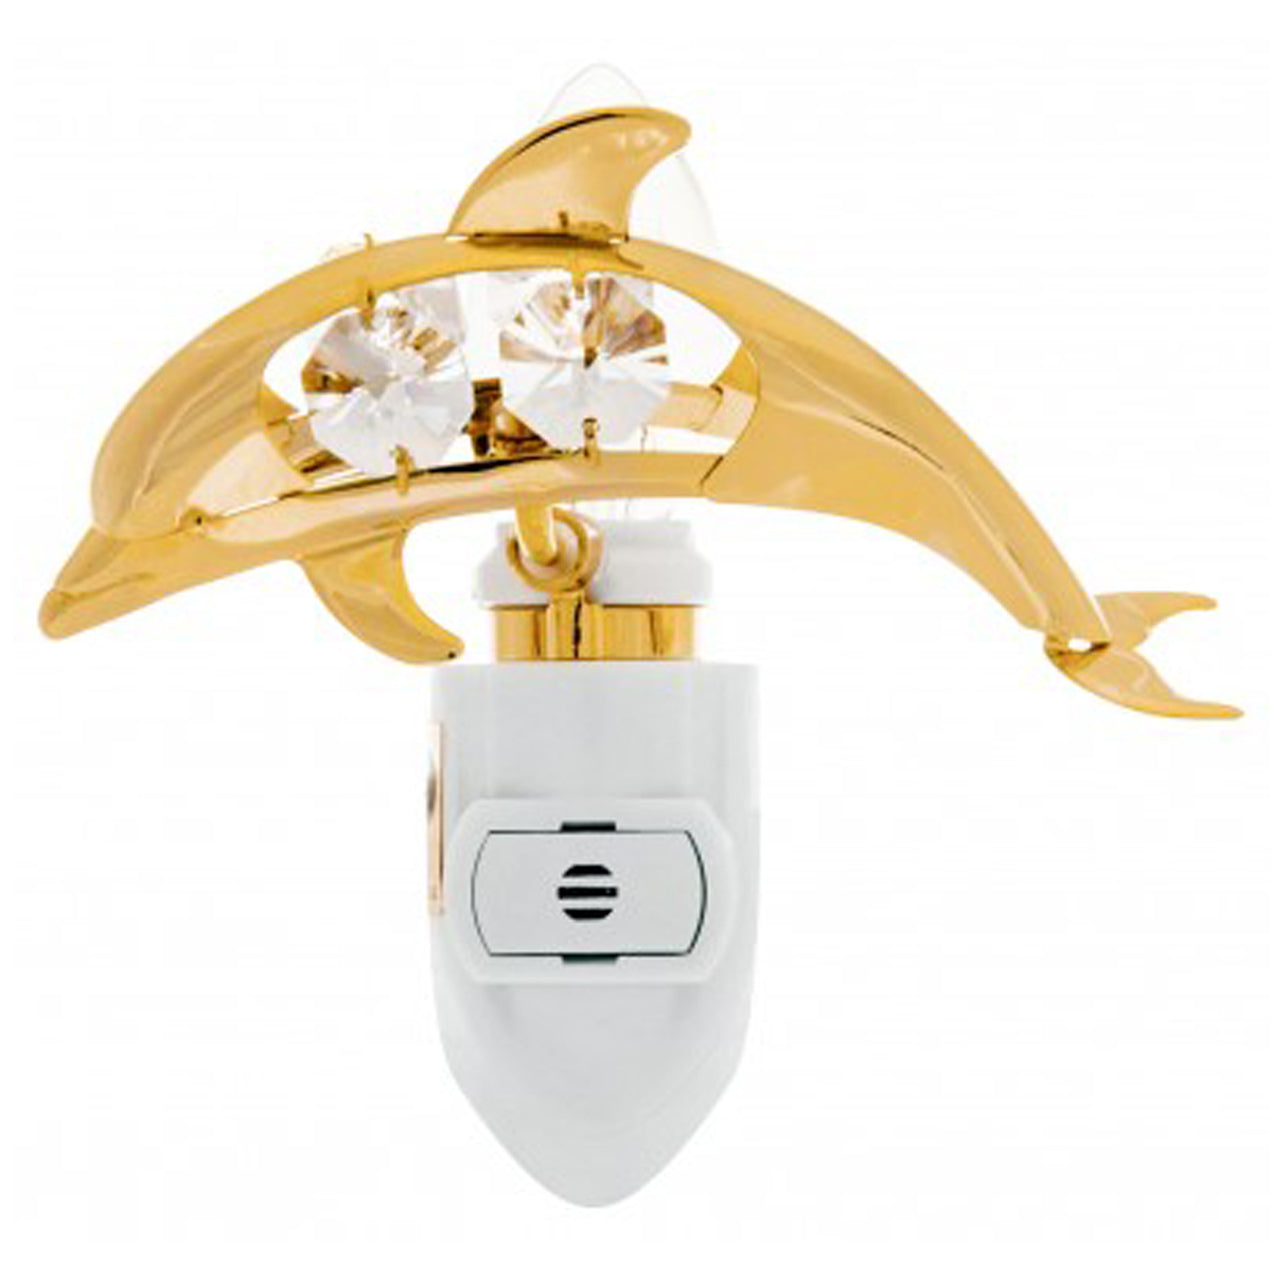 Fire Sale! Dolphin Night Light 24K Gold Plated w Spectra Crystals